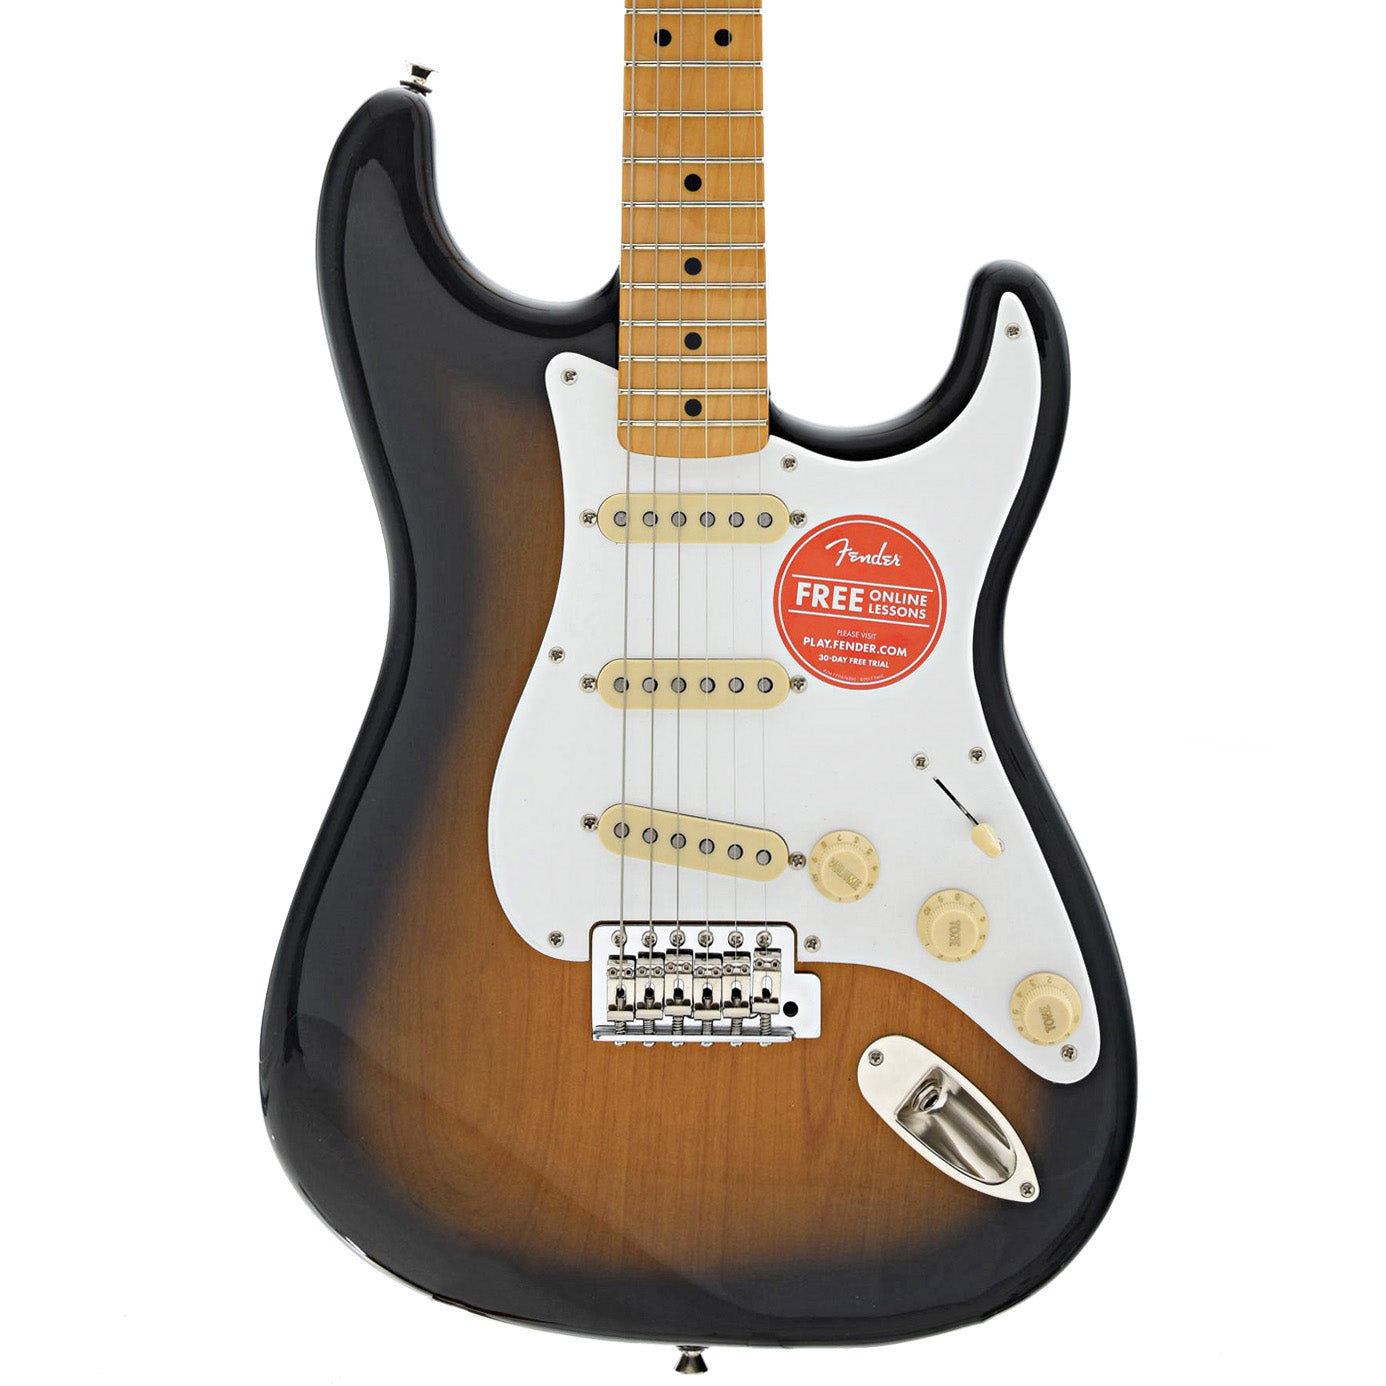 SALE豊富なSquier by Fender Classic Vibe 60s Stratocaster スクワイヤー フェンダー ストラトキャスター クラシックバイヴ エレキギター フェンダー